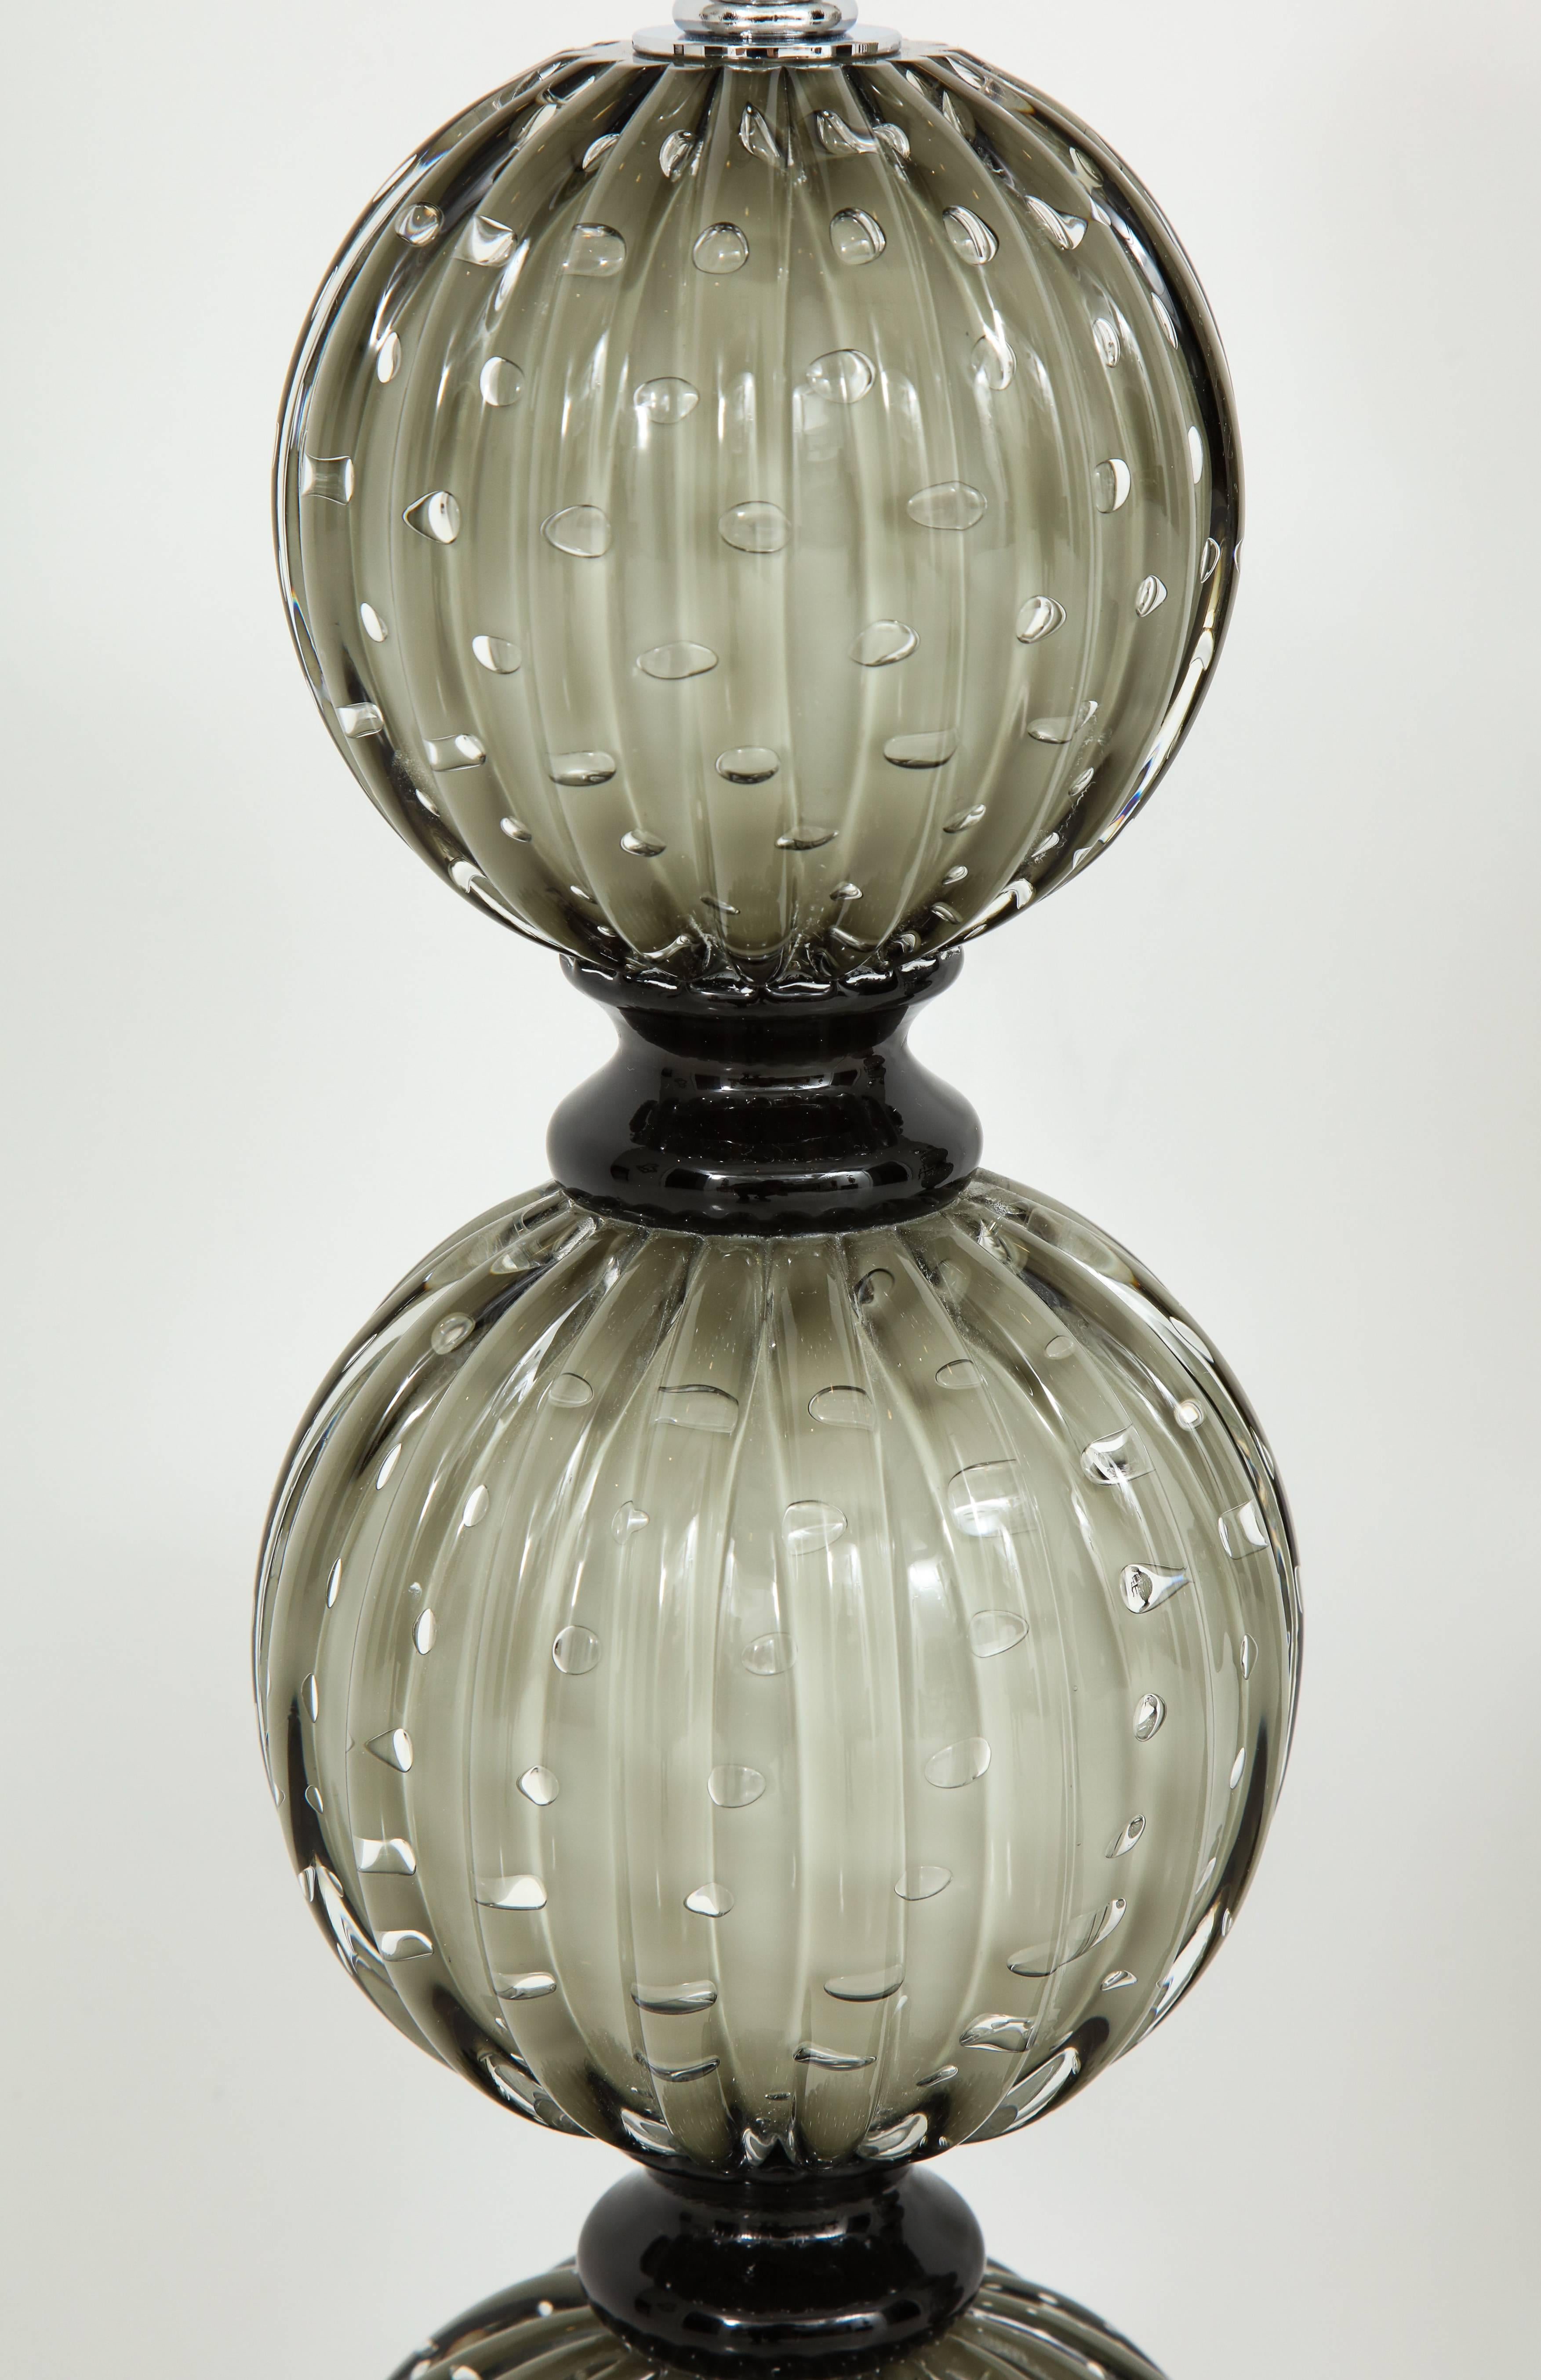 Pair of heavy Murano glass table lamps in the style of Barovier. The glass color is a soft grey over an ivory underlay with clear bubbles inside glass layer creating a gorgeous look and texture. Each of the three glass spheres is divided by a dark